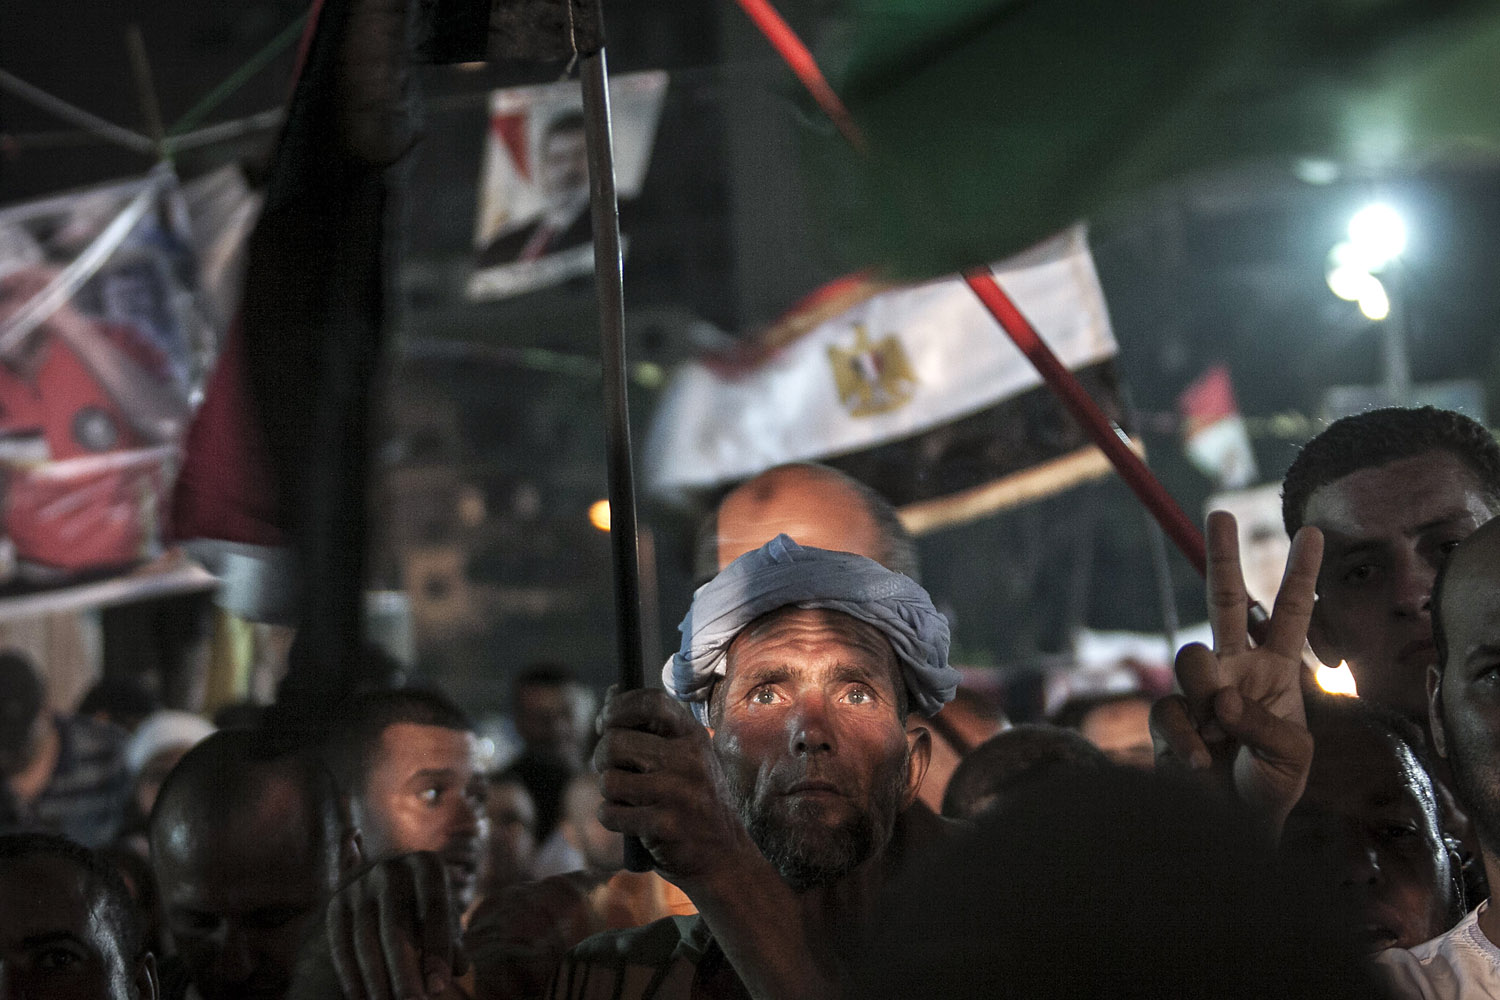 Supporters of ousted Egyptian President Mohammed Morsi during a sit-in, in the Nasr City neighborhood of Cairo.